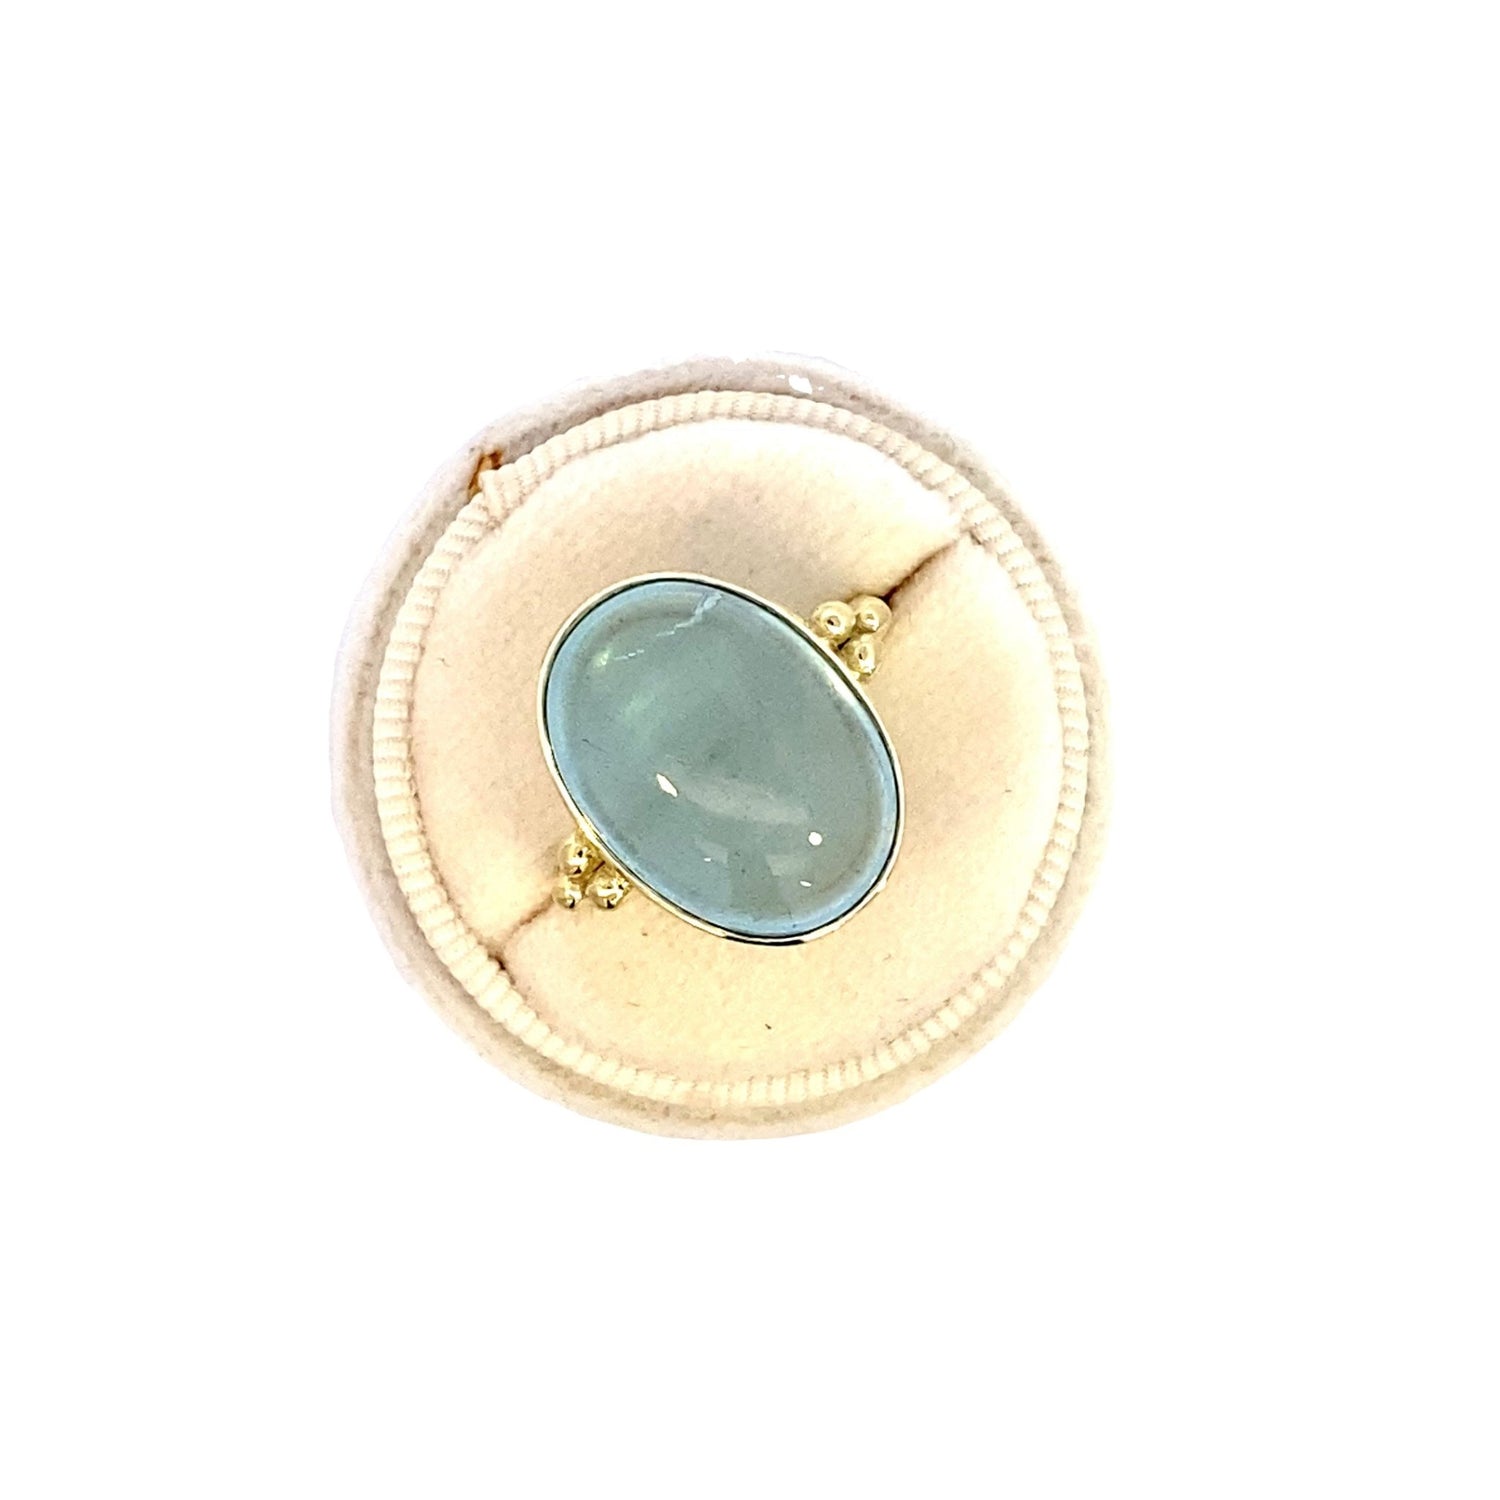 Ring aquamarine large oval in bezel 14kt yellow gold - Gaines Jewelers